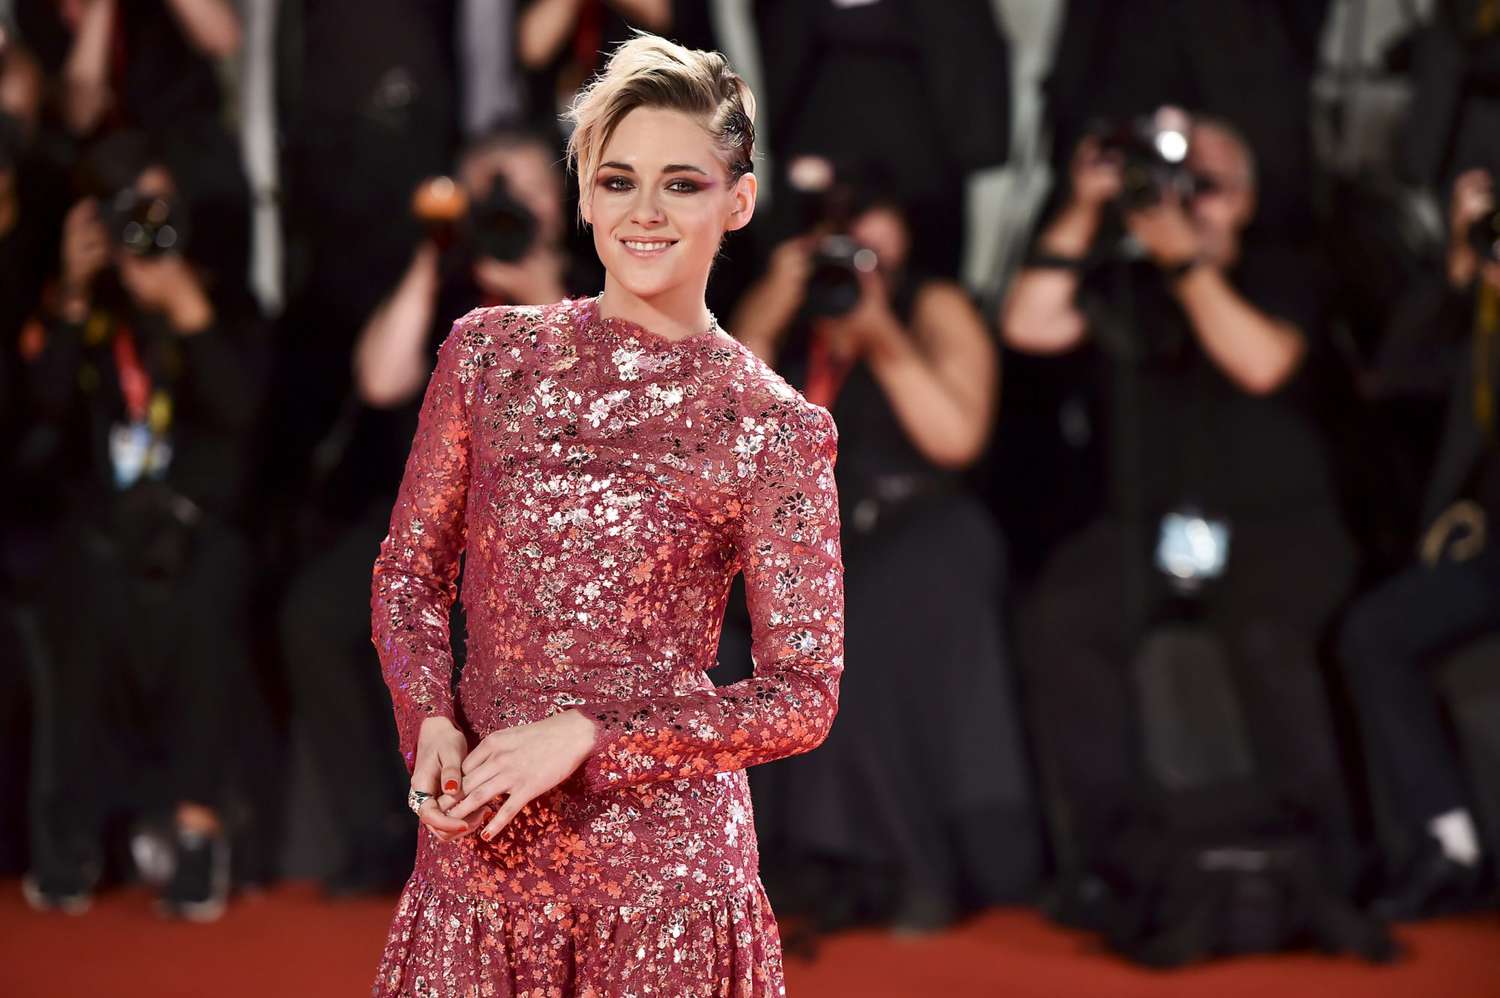 VENICE, ITALY - AUGUST 30: Kristen Stewart walks the red carpet ahead of the "Seberg" screening during the 76th Venice Film Festival at Sala Grande on August 30, 2019 in Venice, Italy. (Photo by Theo Wargo/Getty Images)